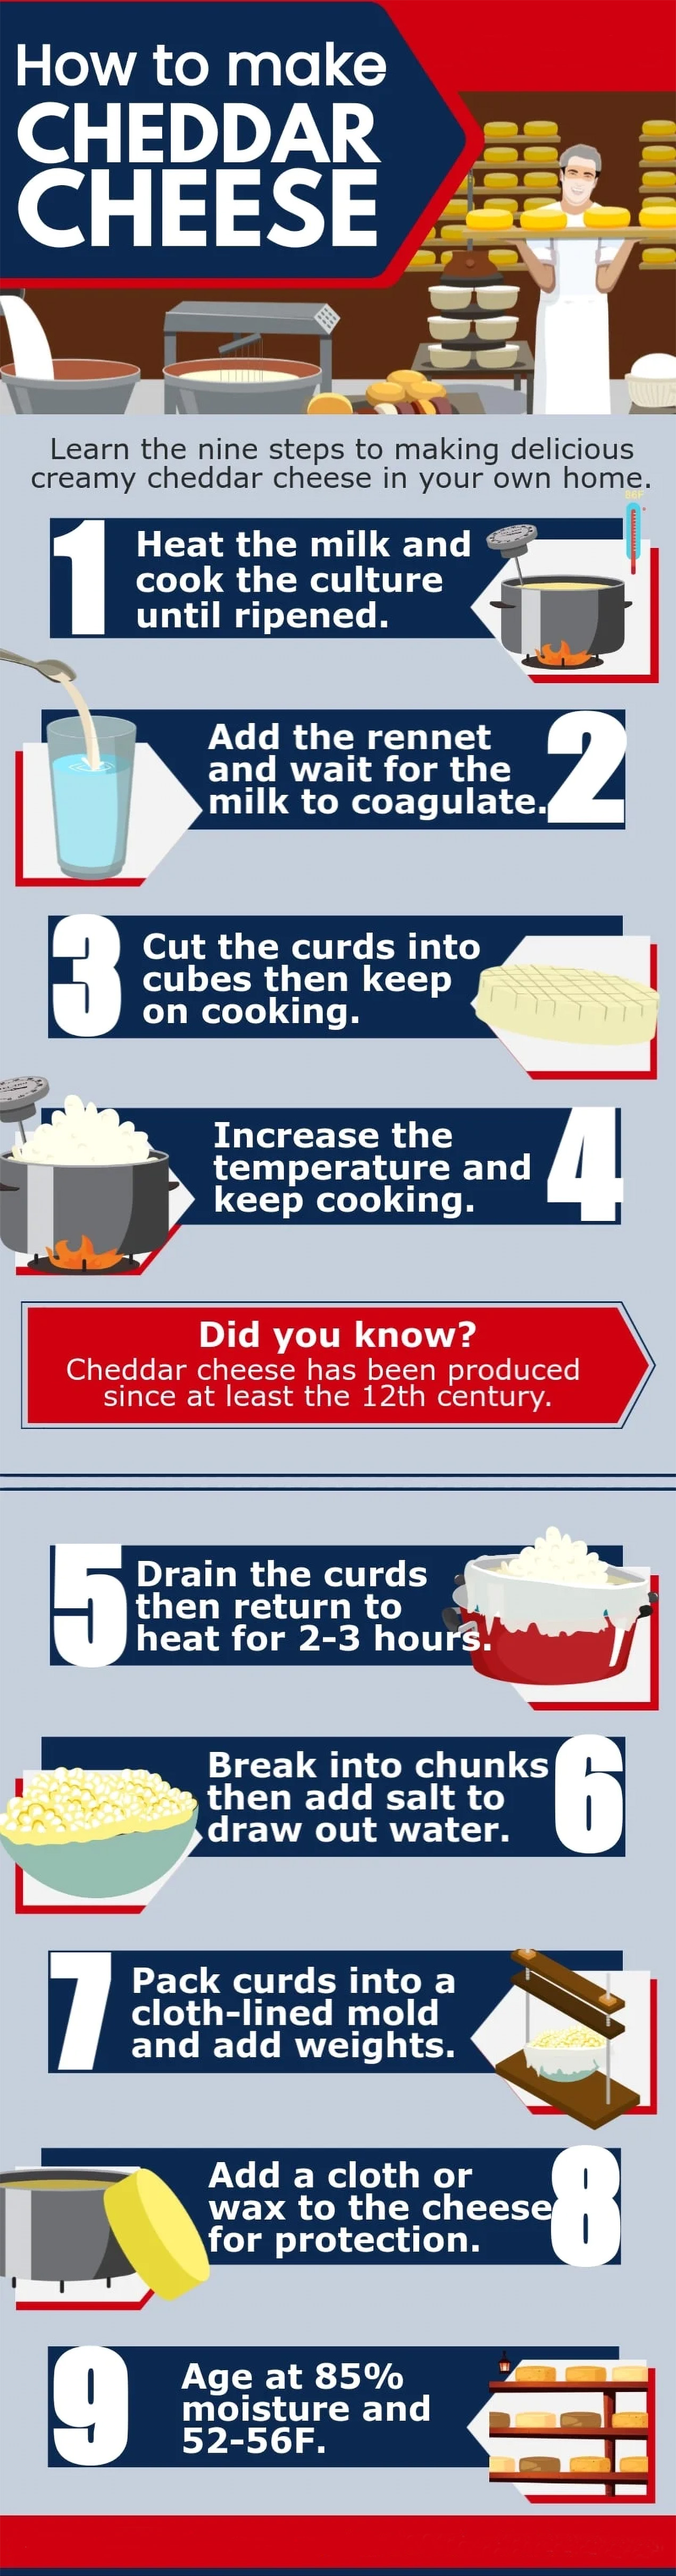 How to make cheddar cheese infographic